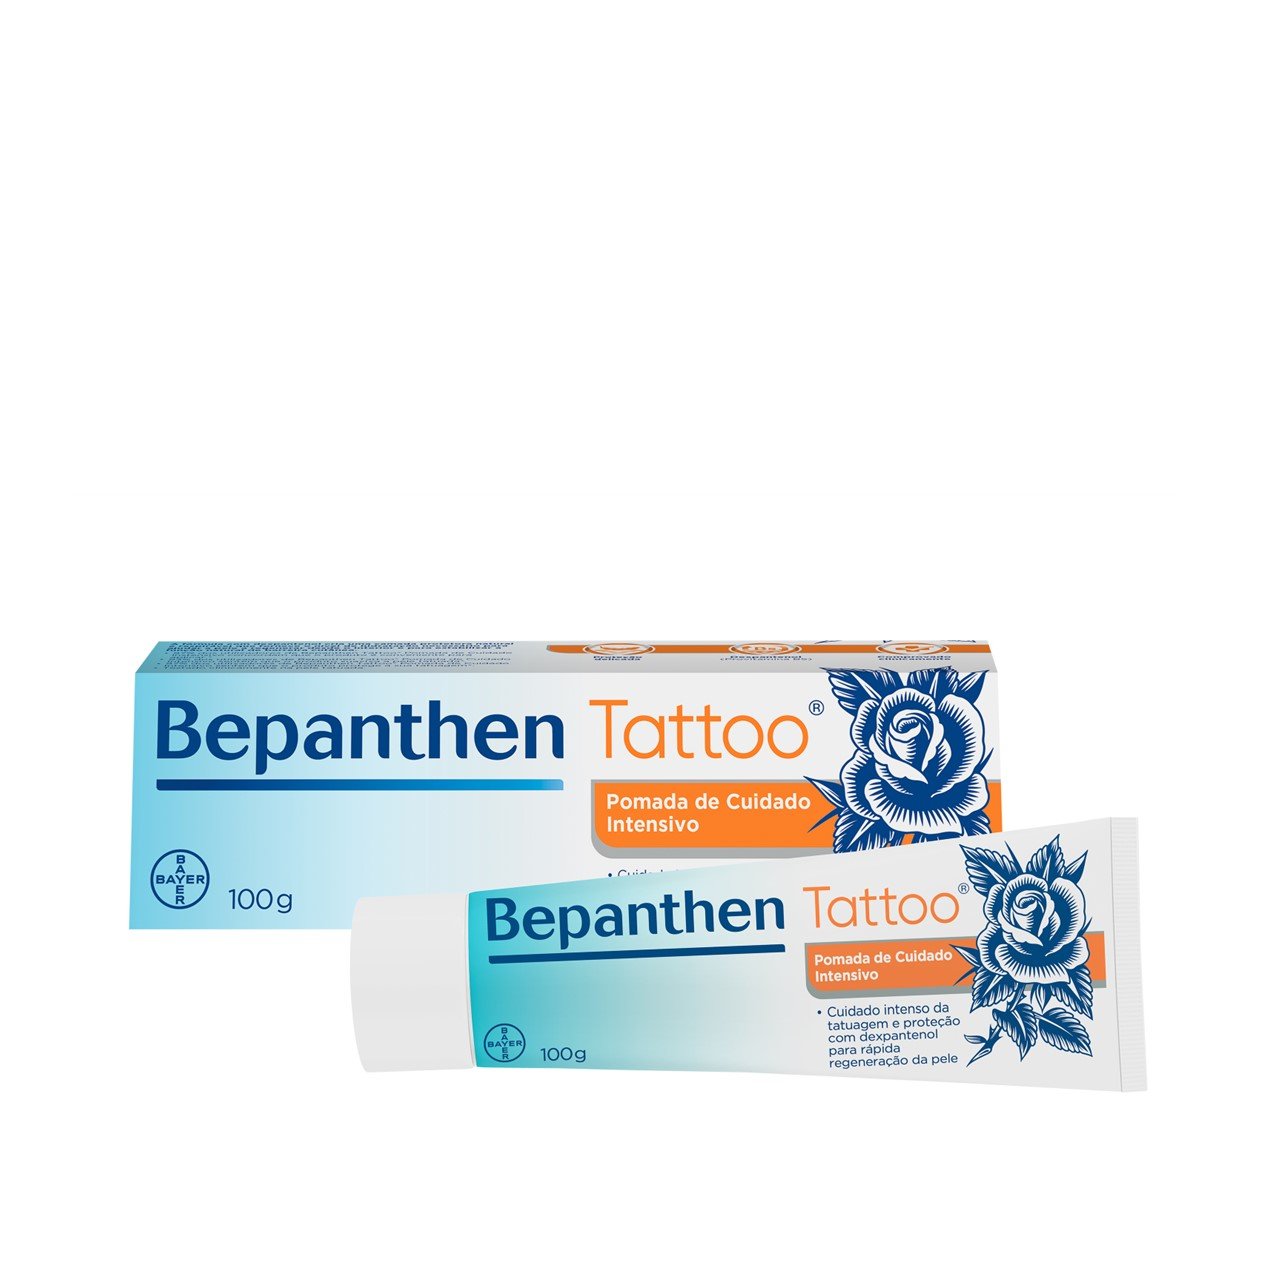 Best Cream or Ointment for Tattoo Aftercare - H2Ocean